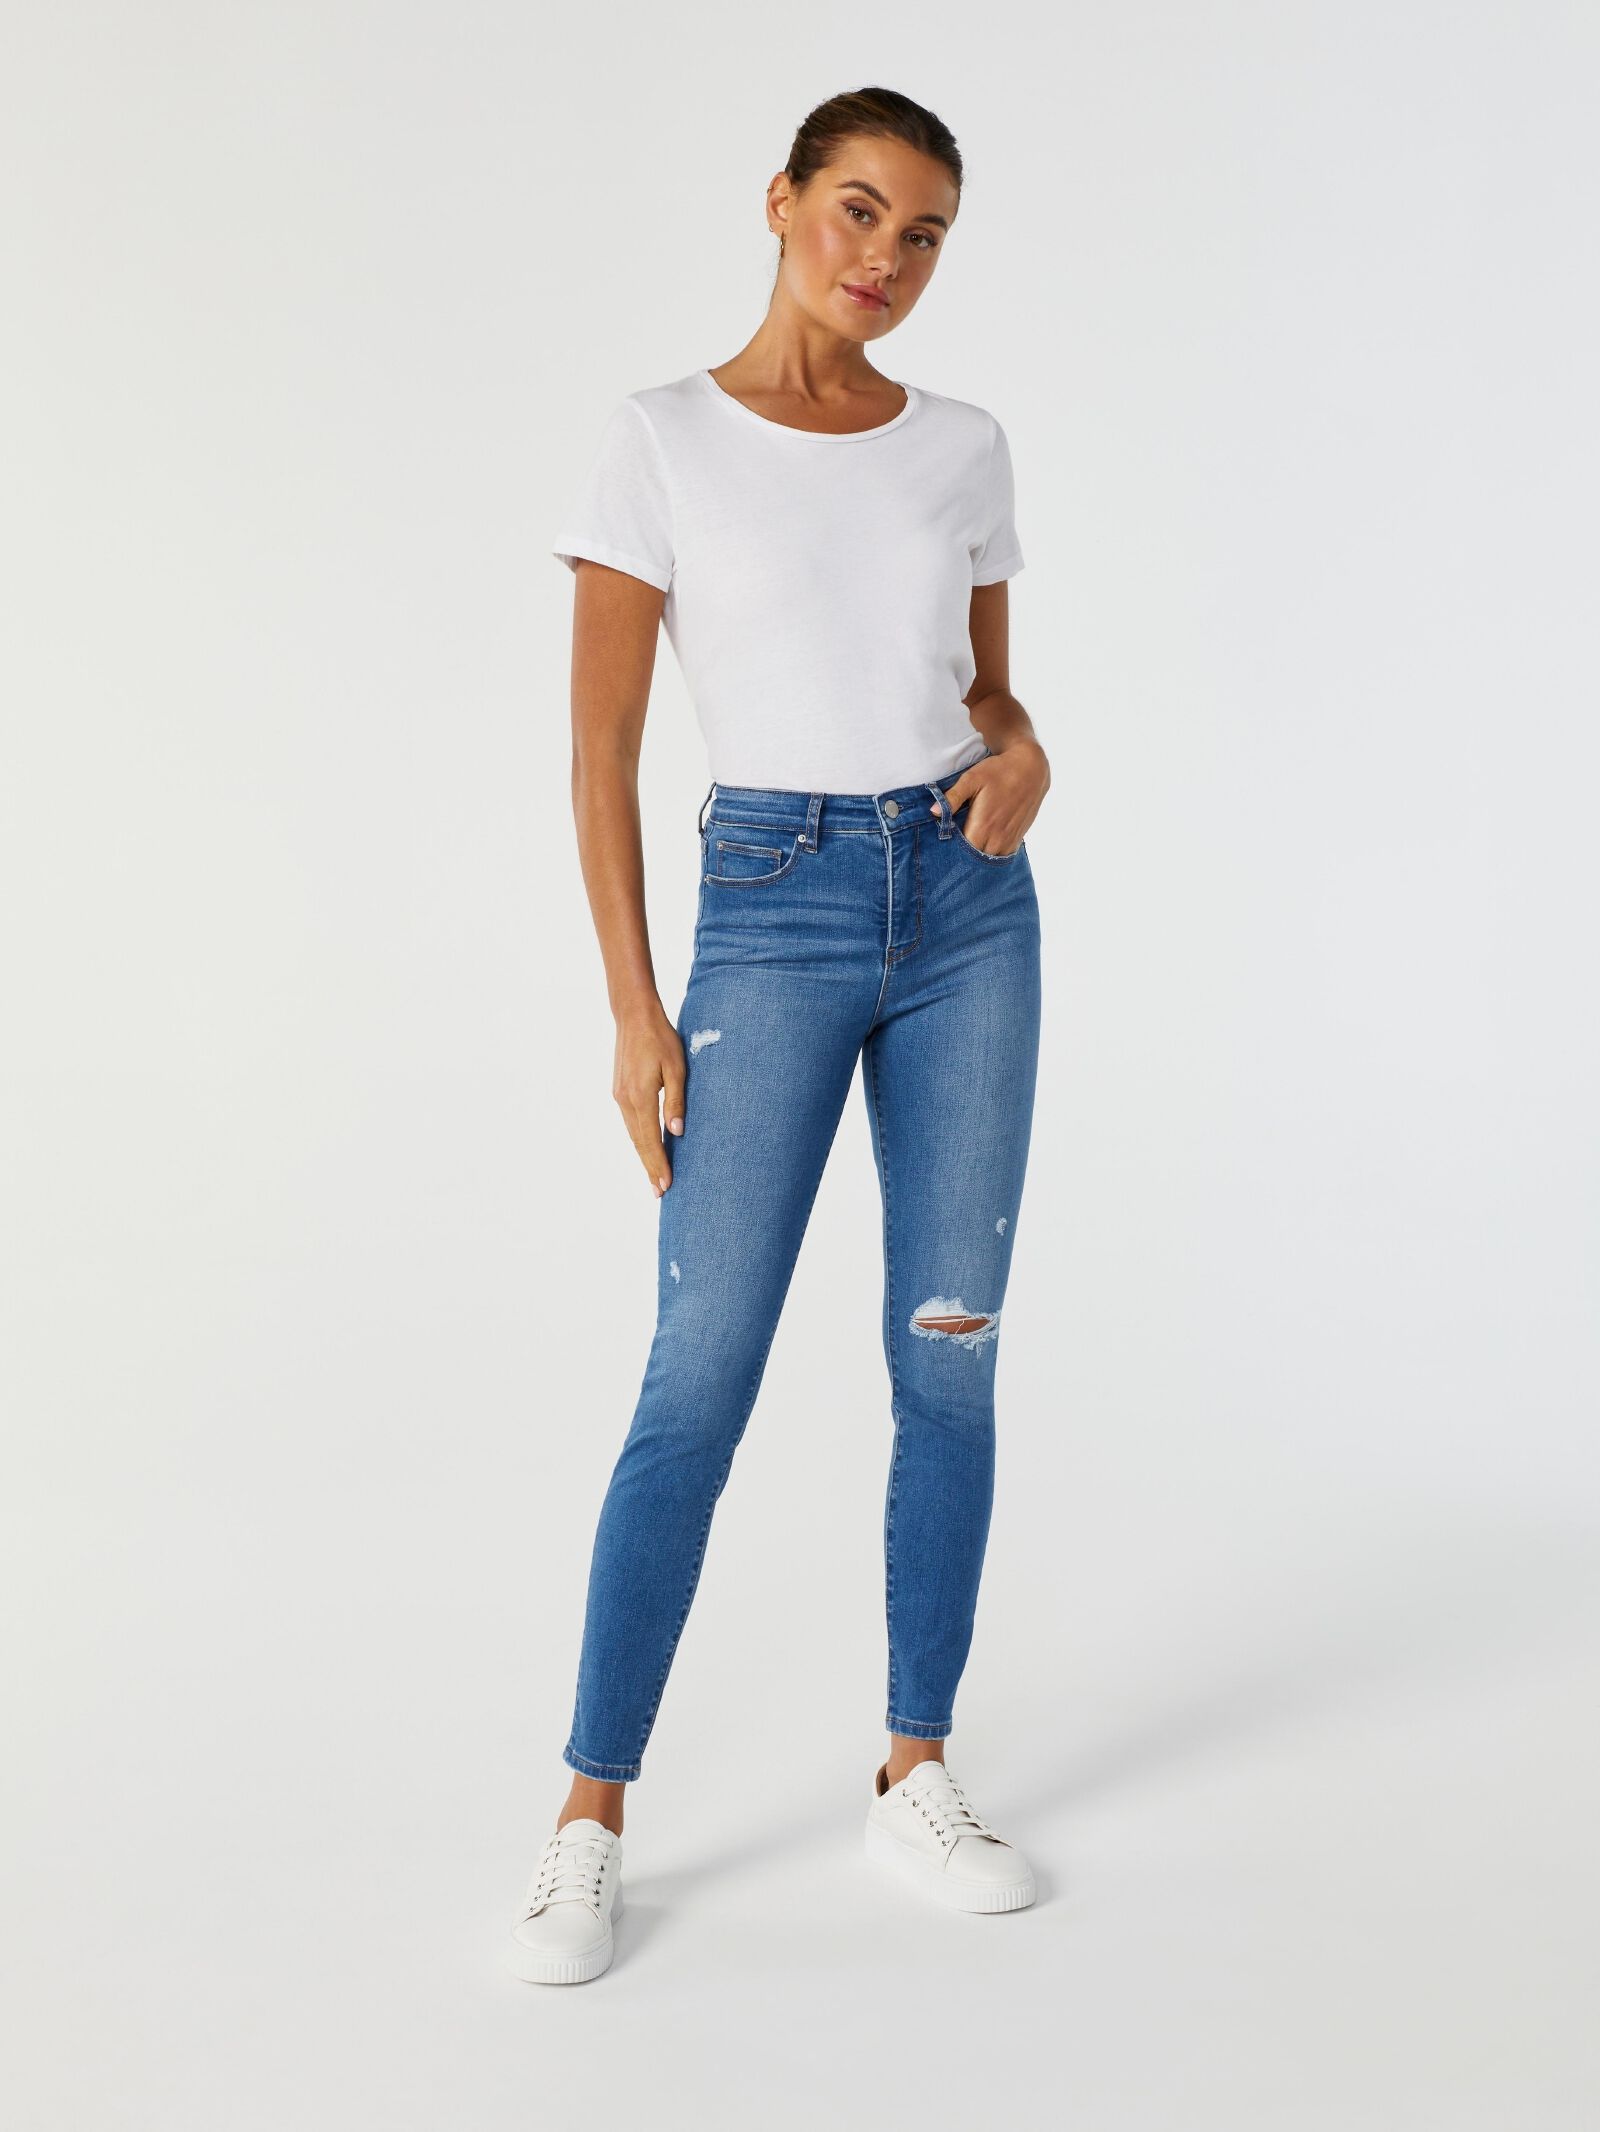 Details more than 115 mid waist jeans